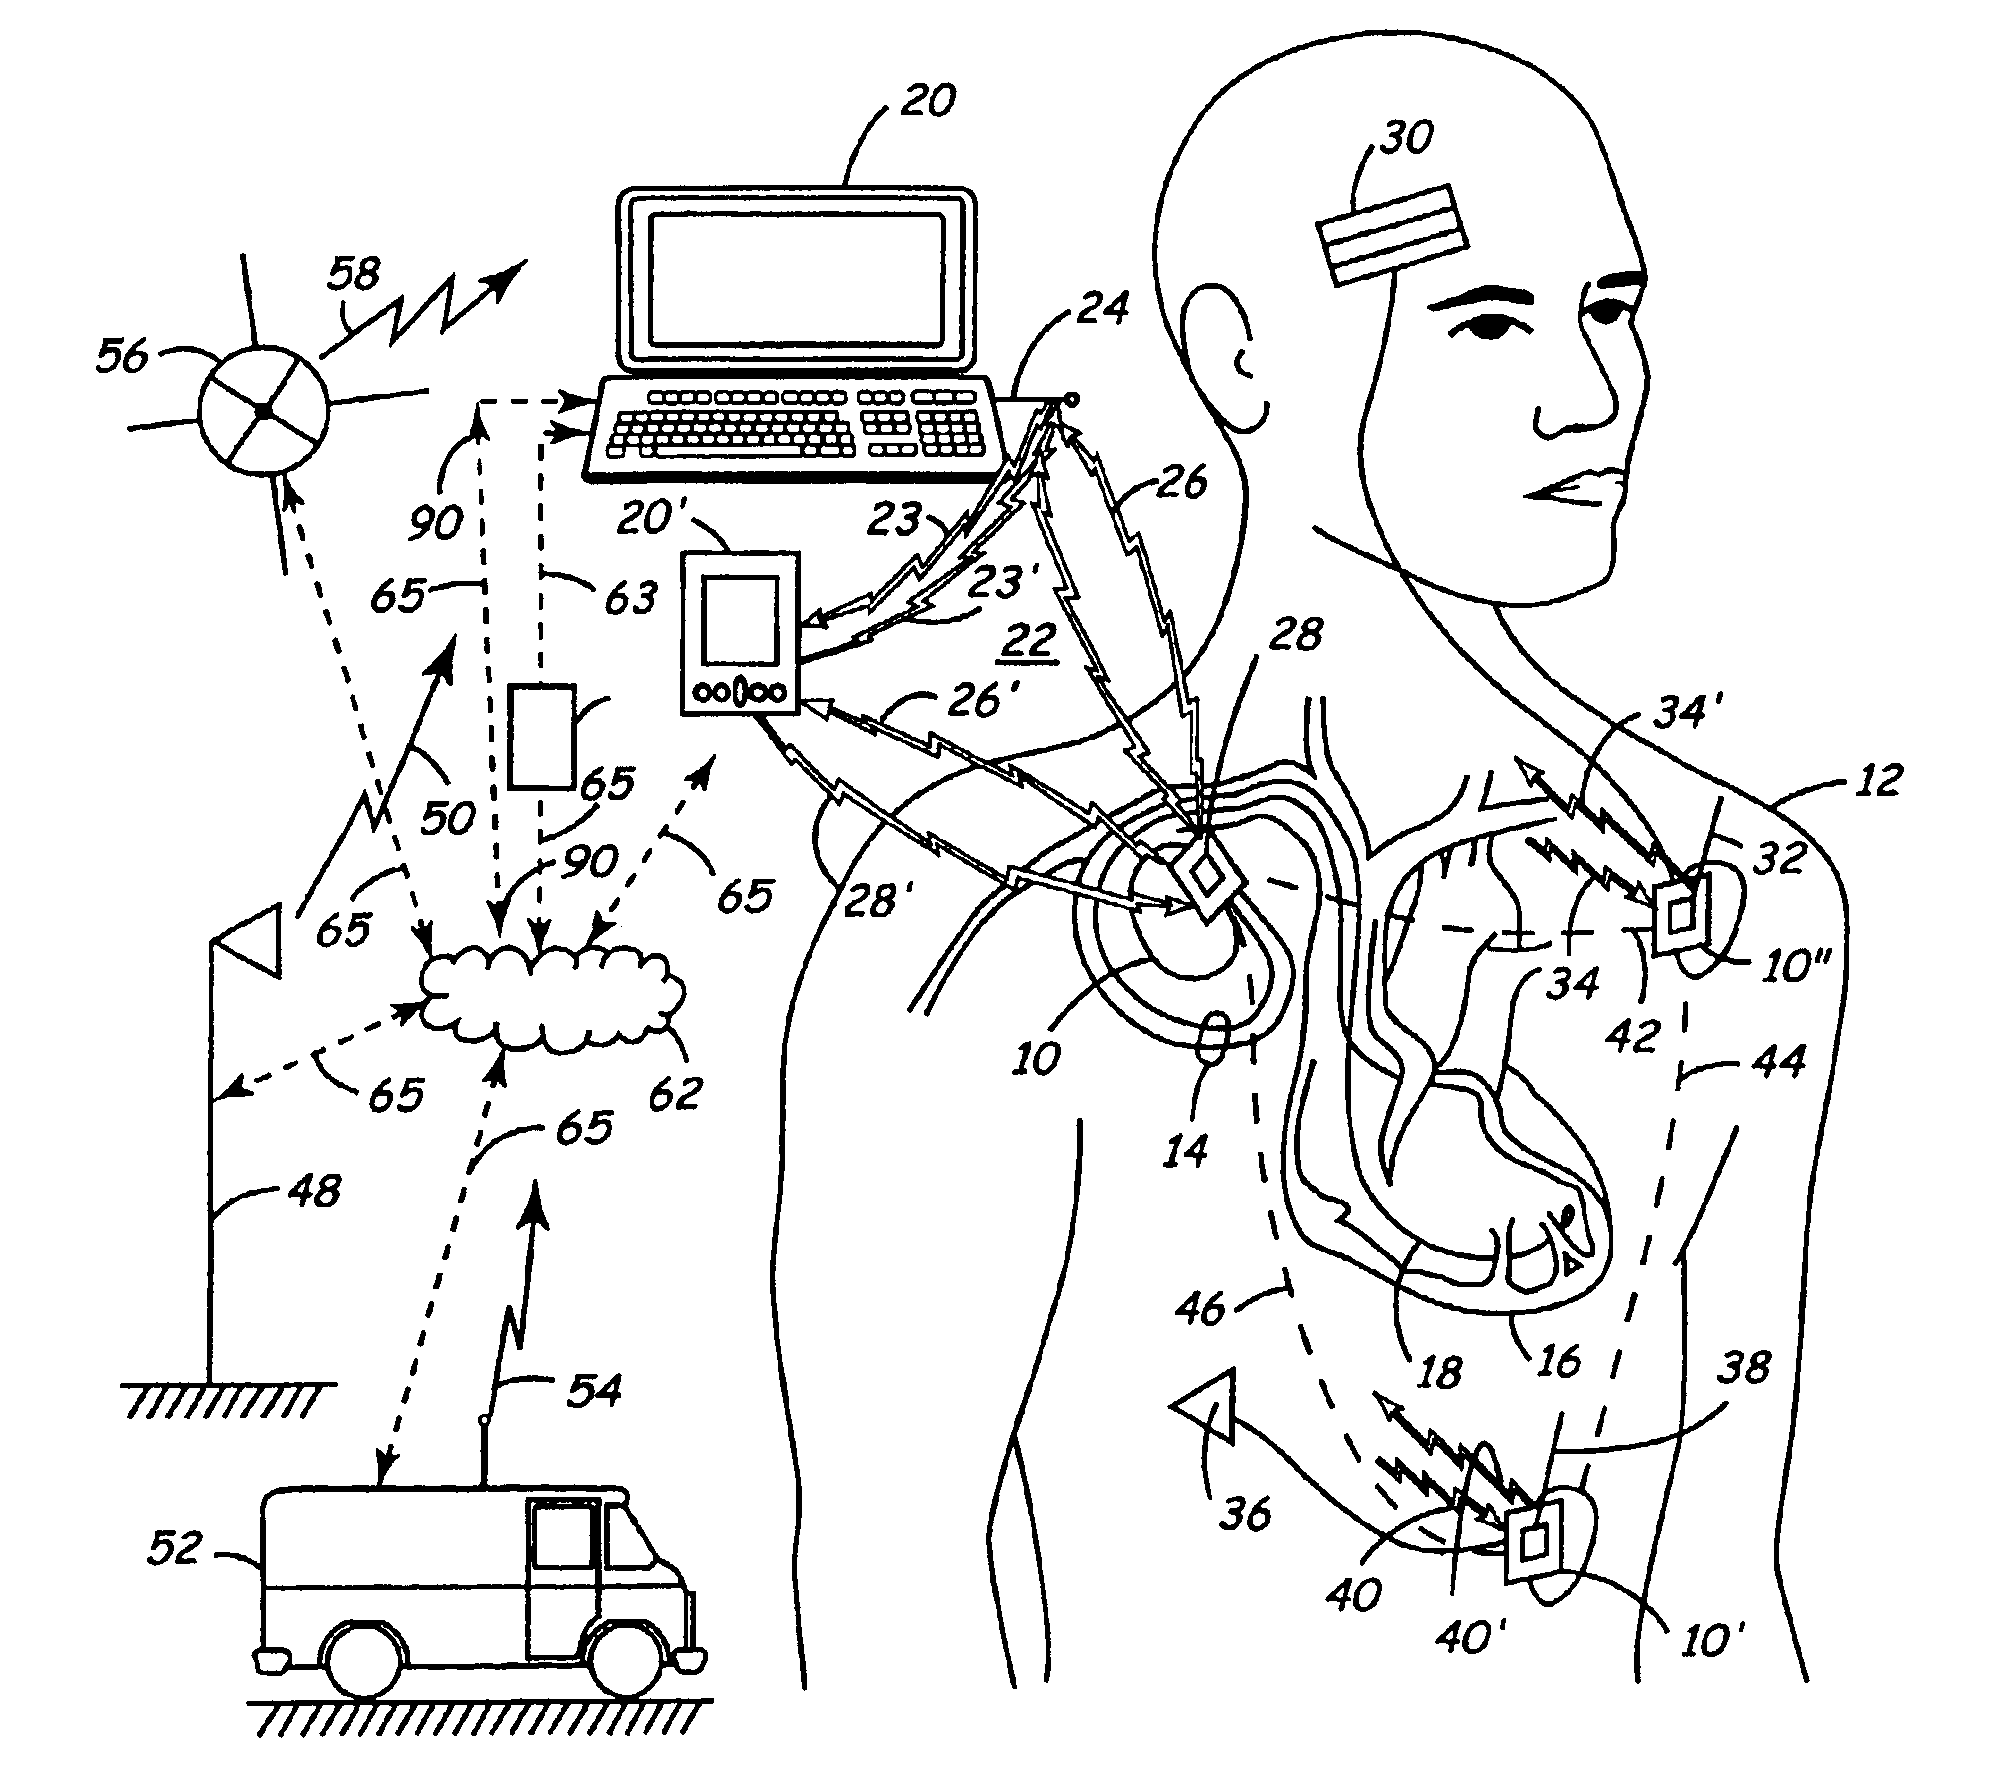 Apparatus and method for remote therapy and diagnosis in medical devices via interface systems